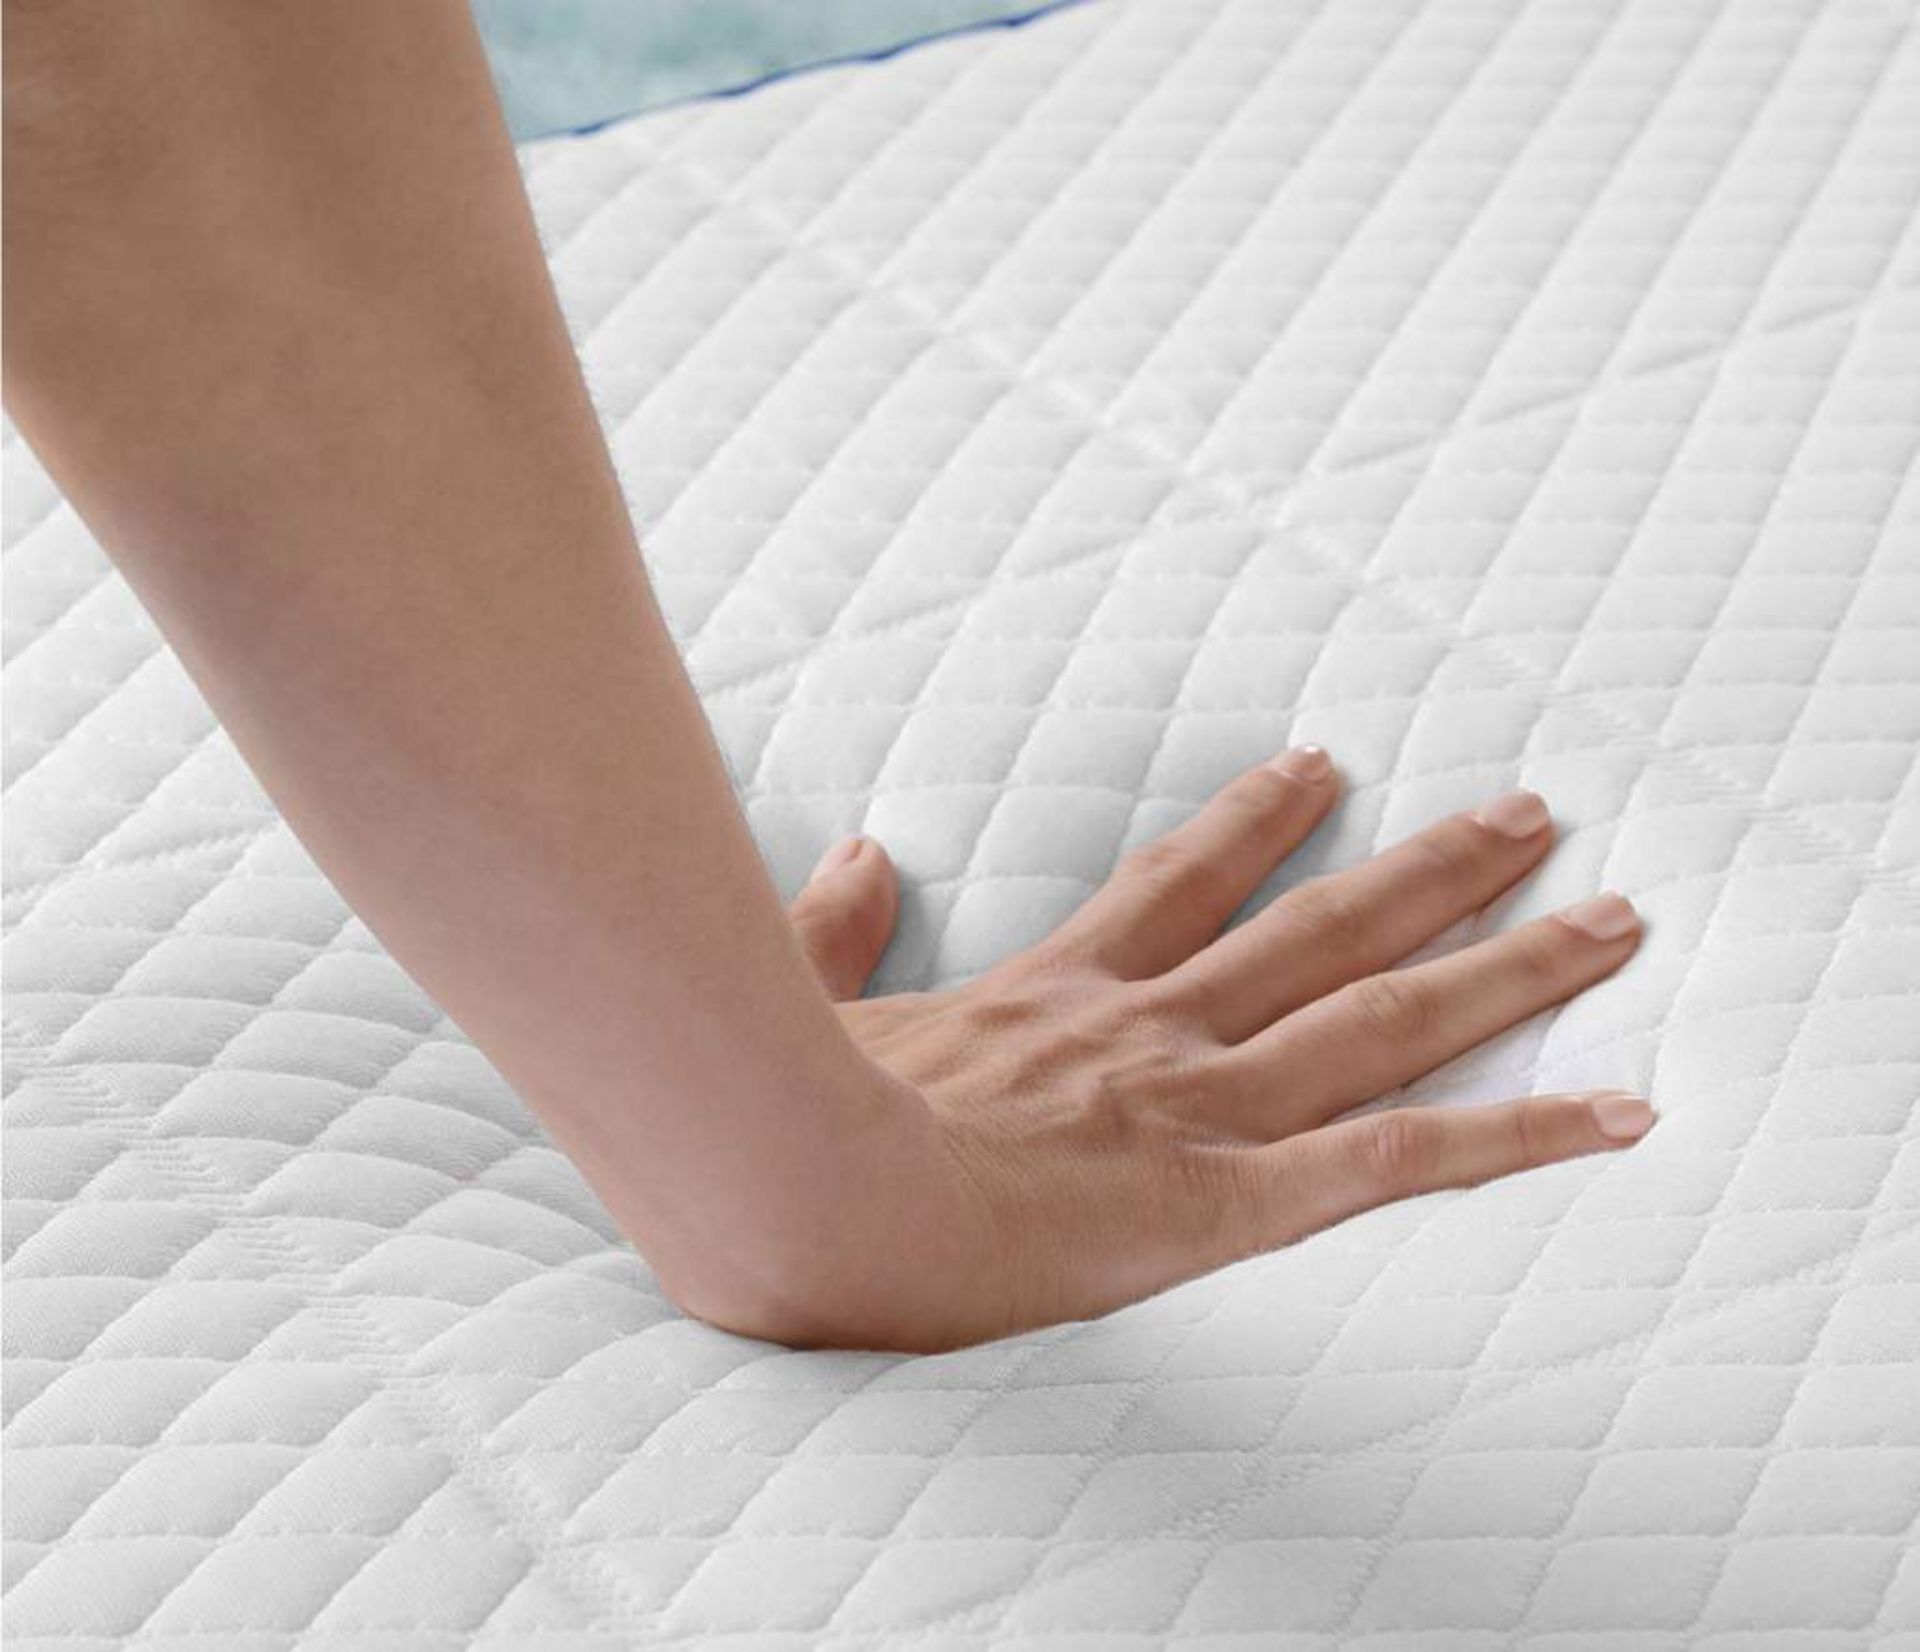 x1| 5ft Nectar Professionally Refurbished Smart Pressure Relieving Memory Foam Mattress|RRP £669| - Image 2 of 2